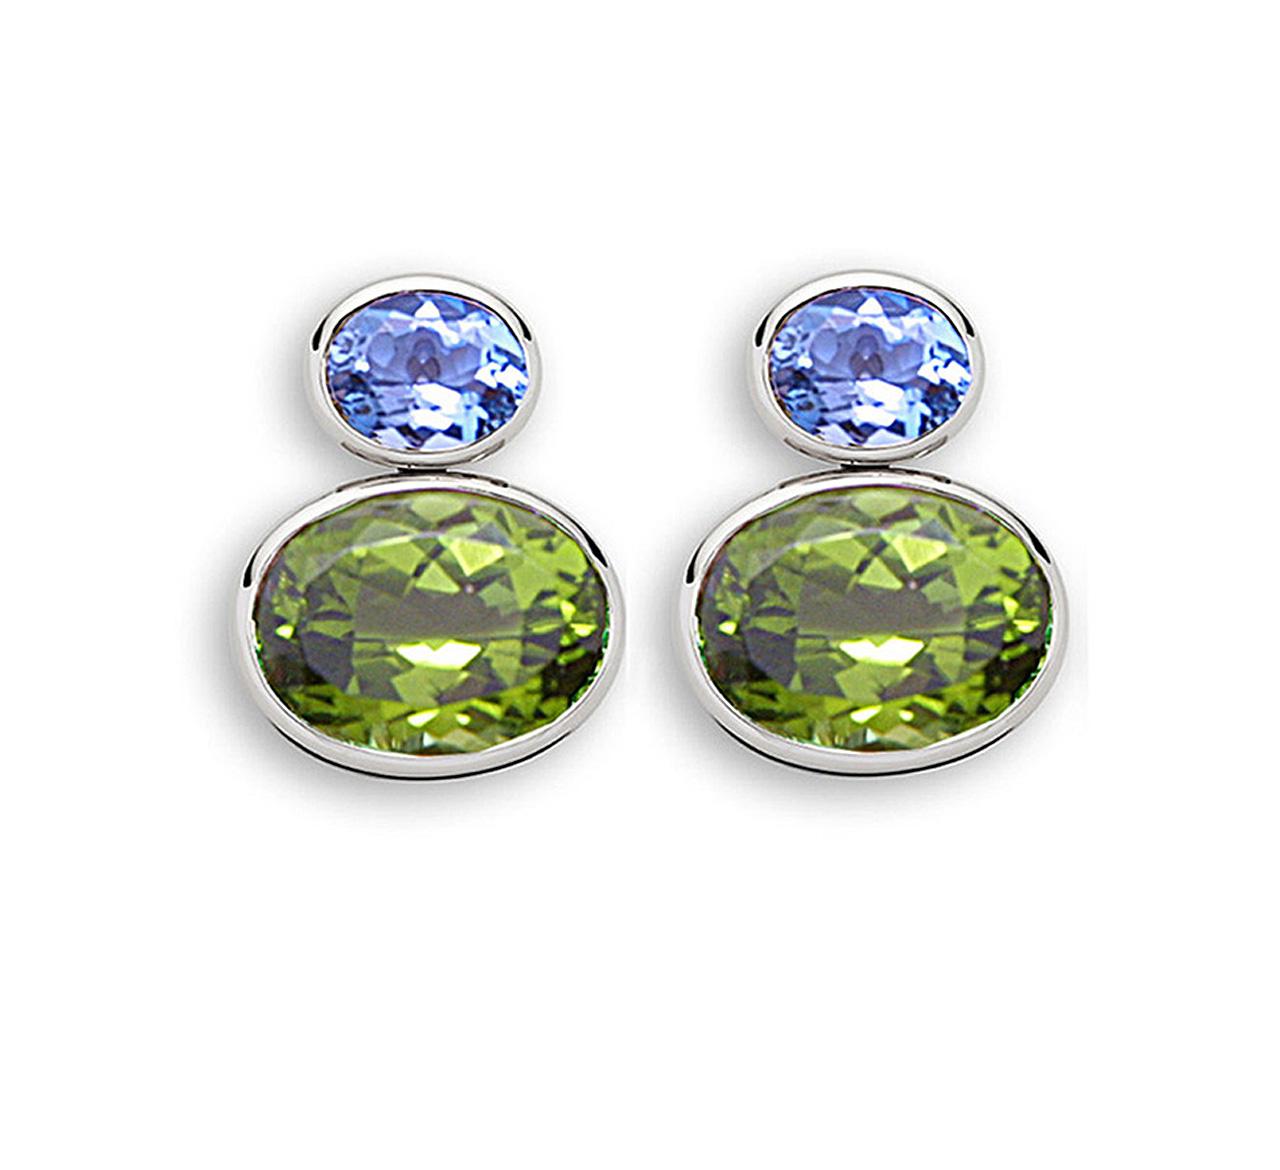 These 18k white gold earrings with two enticing peridots 17.55 ct and two shimmering aquamarine 3.55 ct are from the beautiful pure design by Colleen B. Rosenblat.